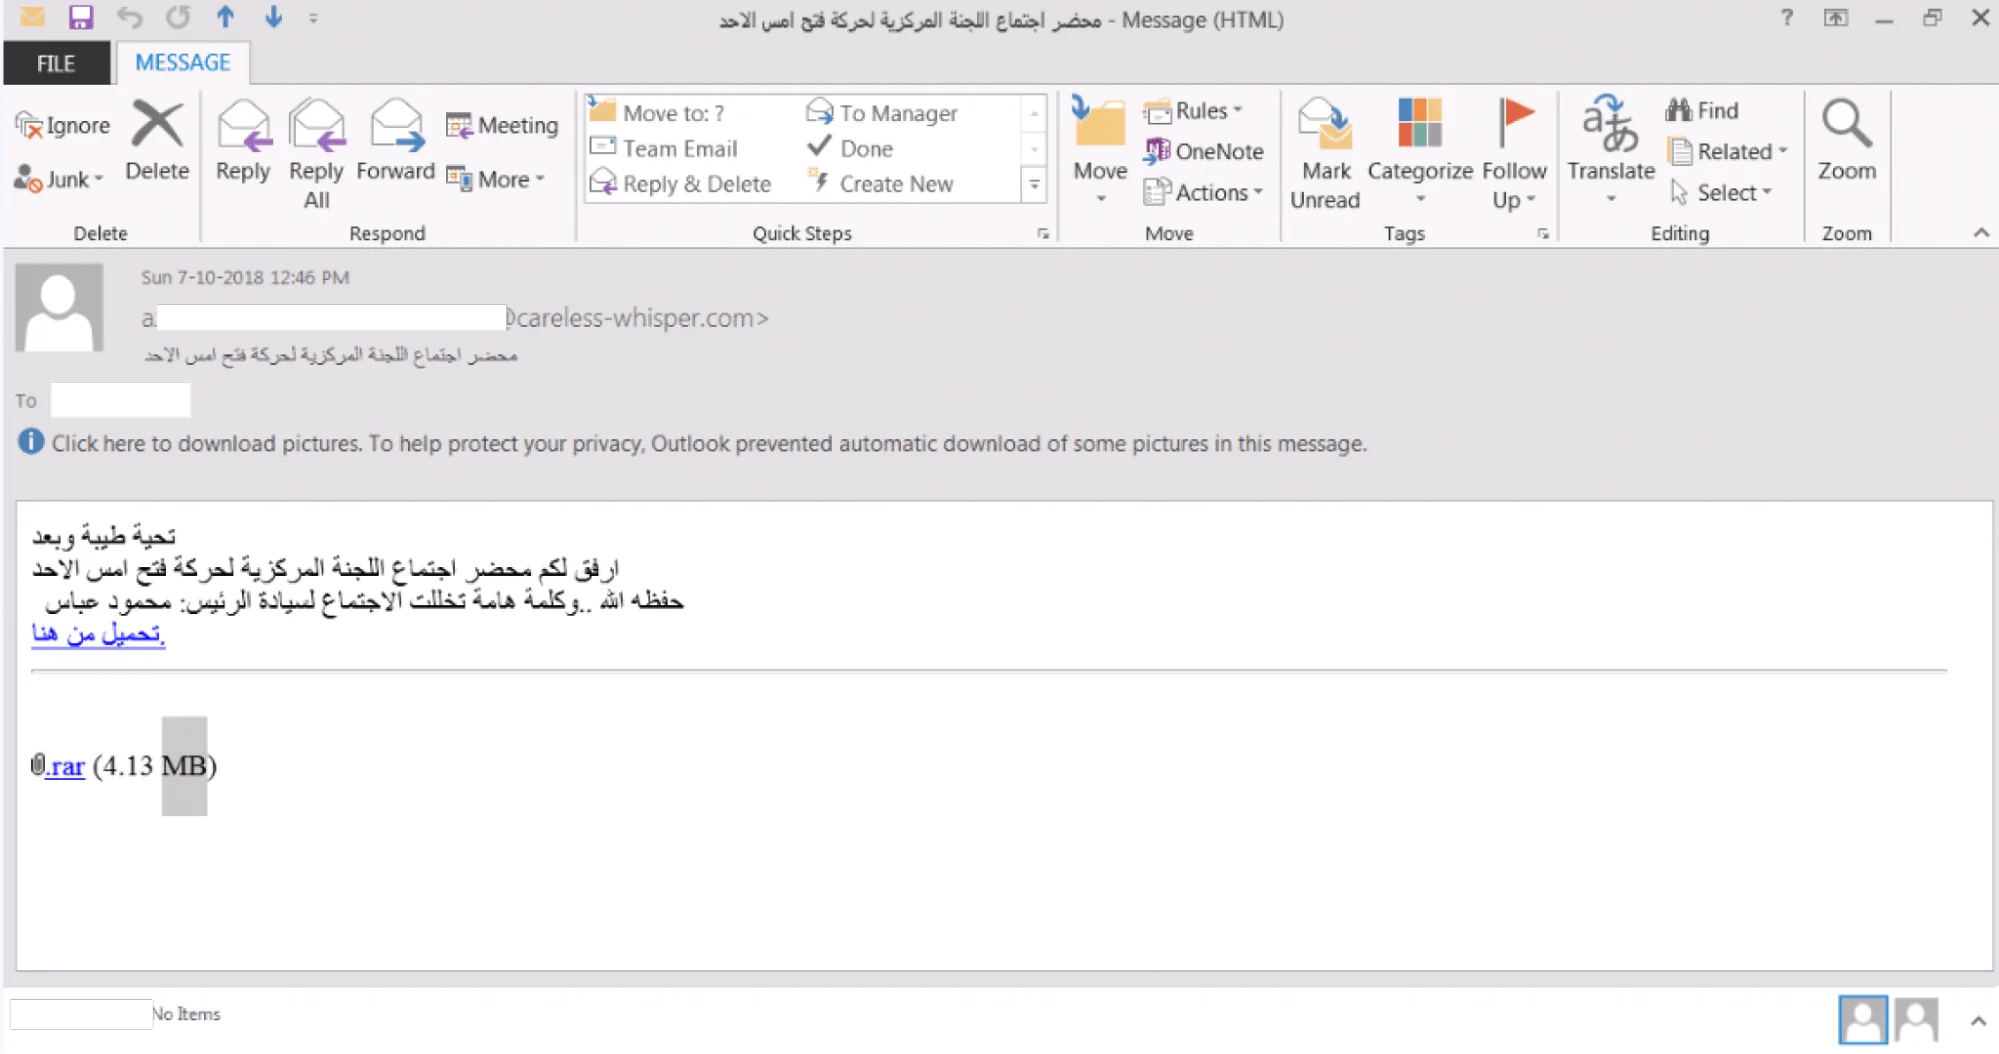 The image is a screenshot of an email interface showing a phishing attempt with a malicious RAR file attachment. (Source: Kaspersky)